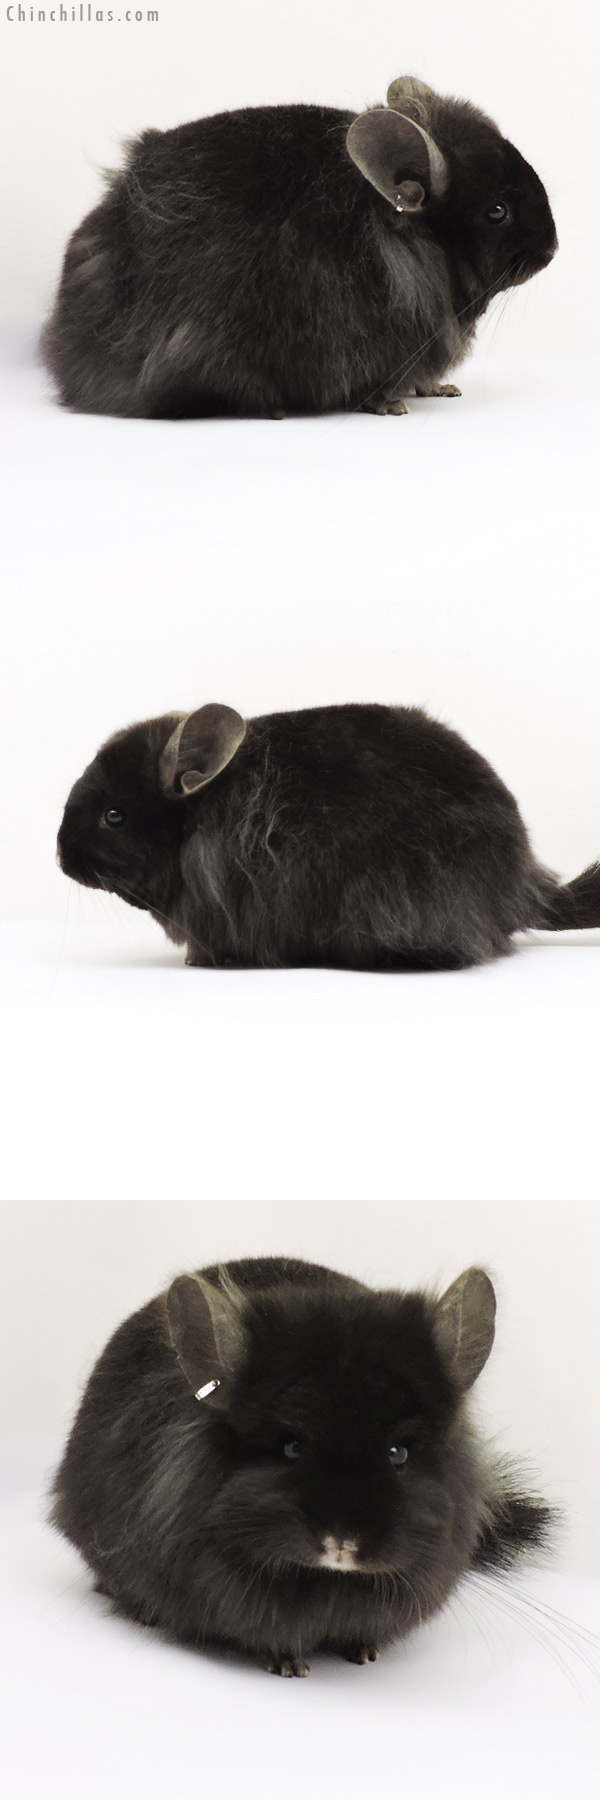 Chinchilla or related item offered for sale or export on Chinchillas.com - 19260 Ebony ( Locken Carrier ) G2  Royal Persian Angora Female Chinchilla